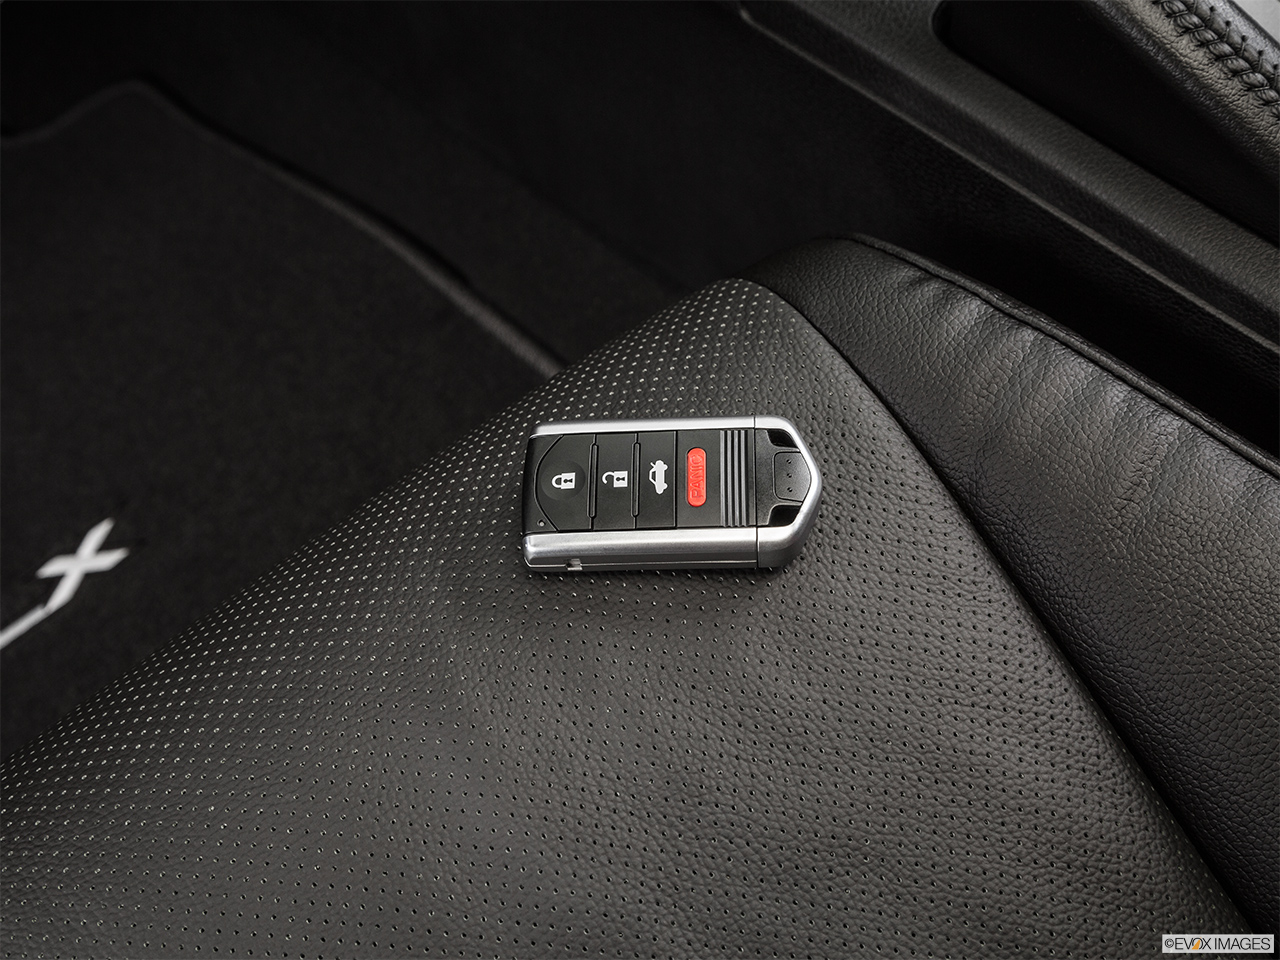 2015 Acura ILX 5-Speed Automatic Key fob on driver's seat. 